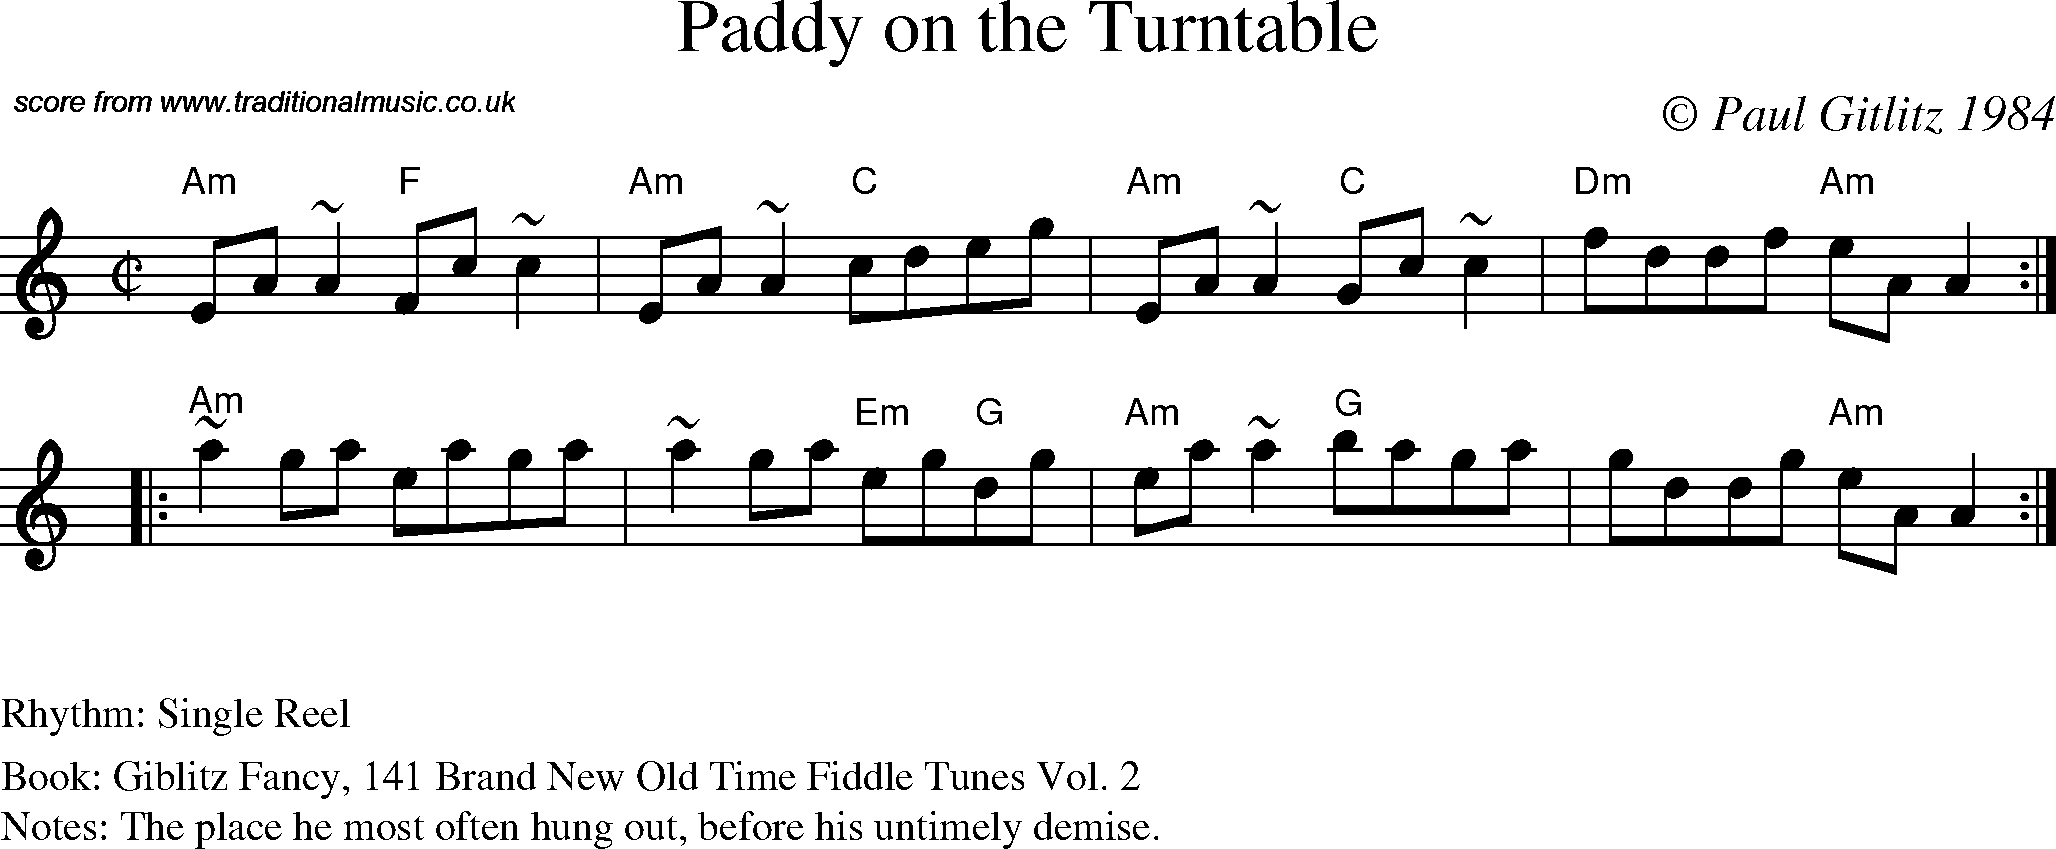 Sheet Music Score for Reel - Paddy on the Turntable